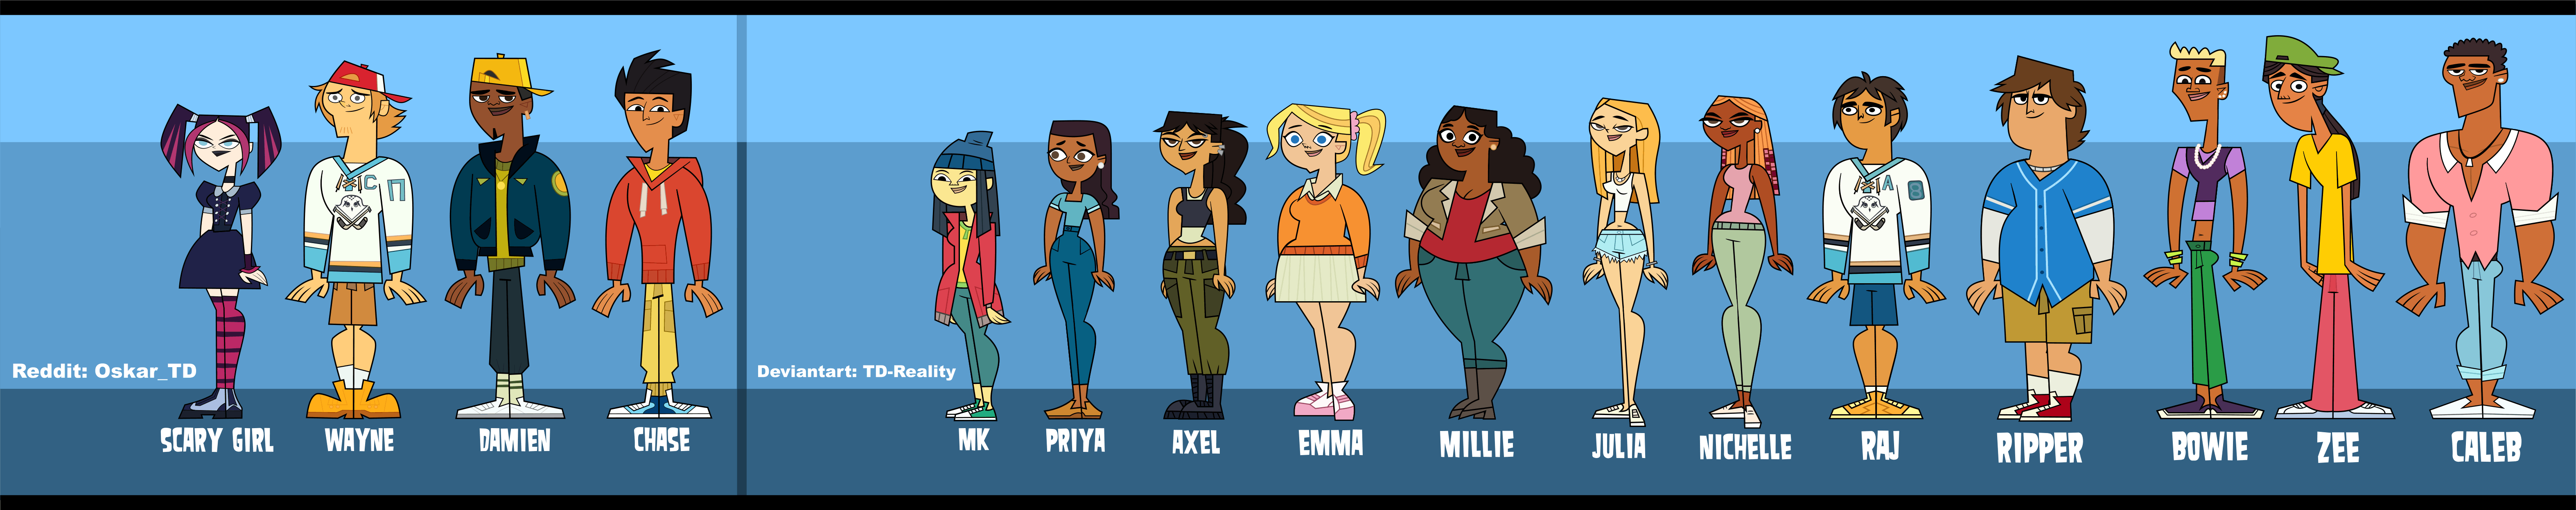 kiiwiibun on X: Drew some characters from Total Drama's new cast! Really  excited to learn more about them. #totaldrama #fanart   / X